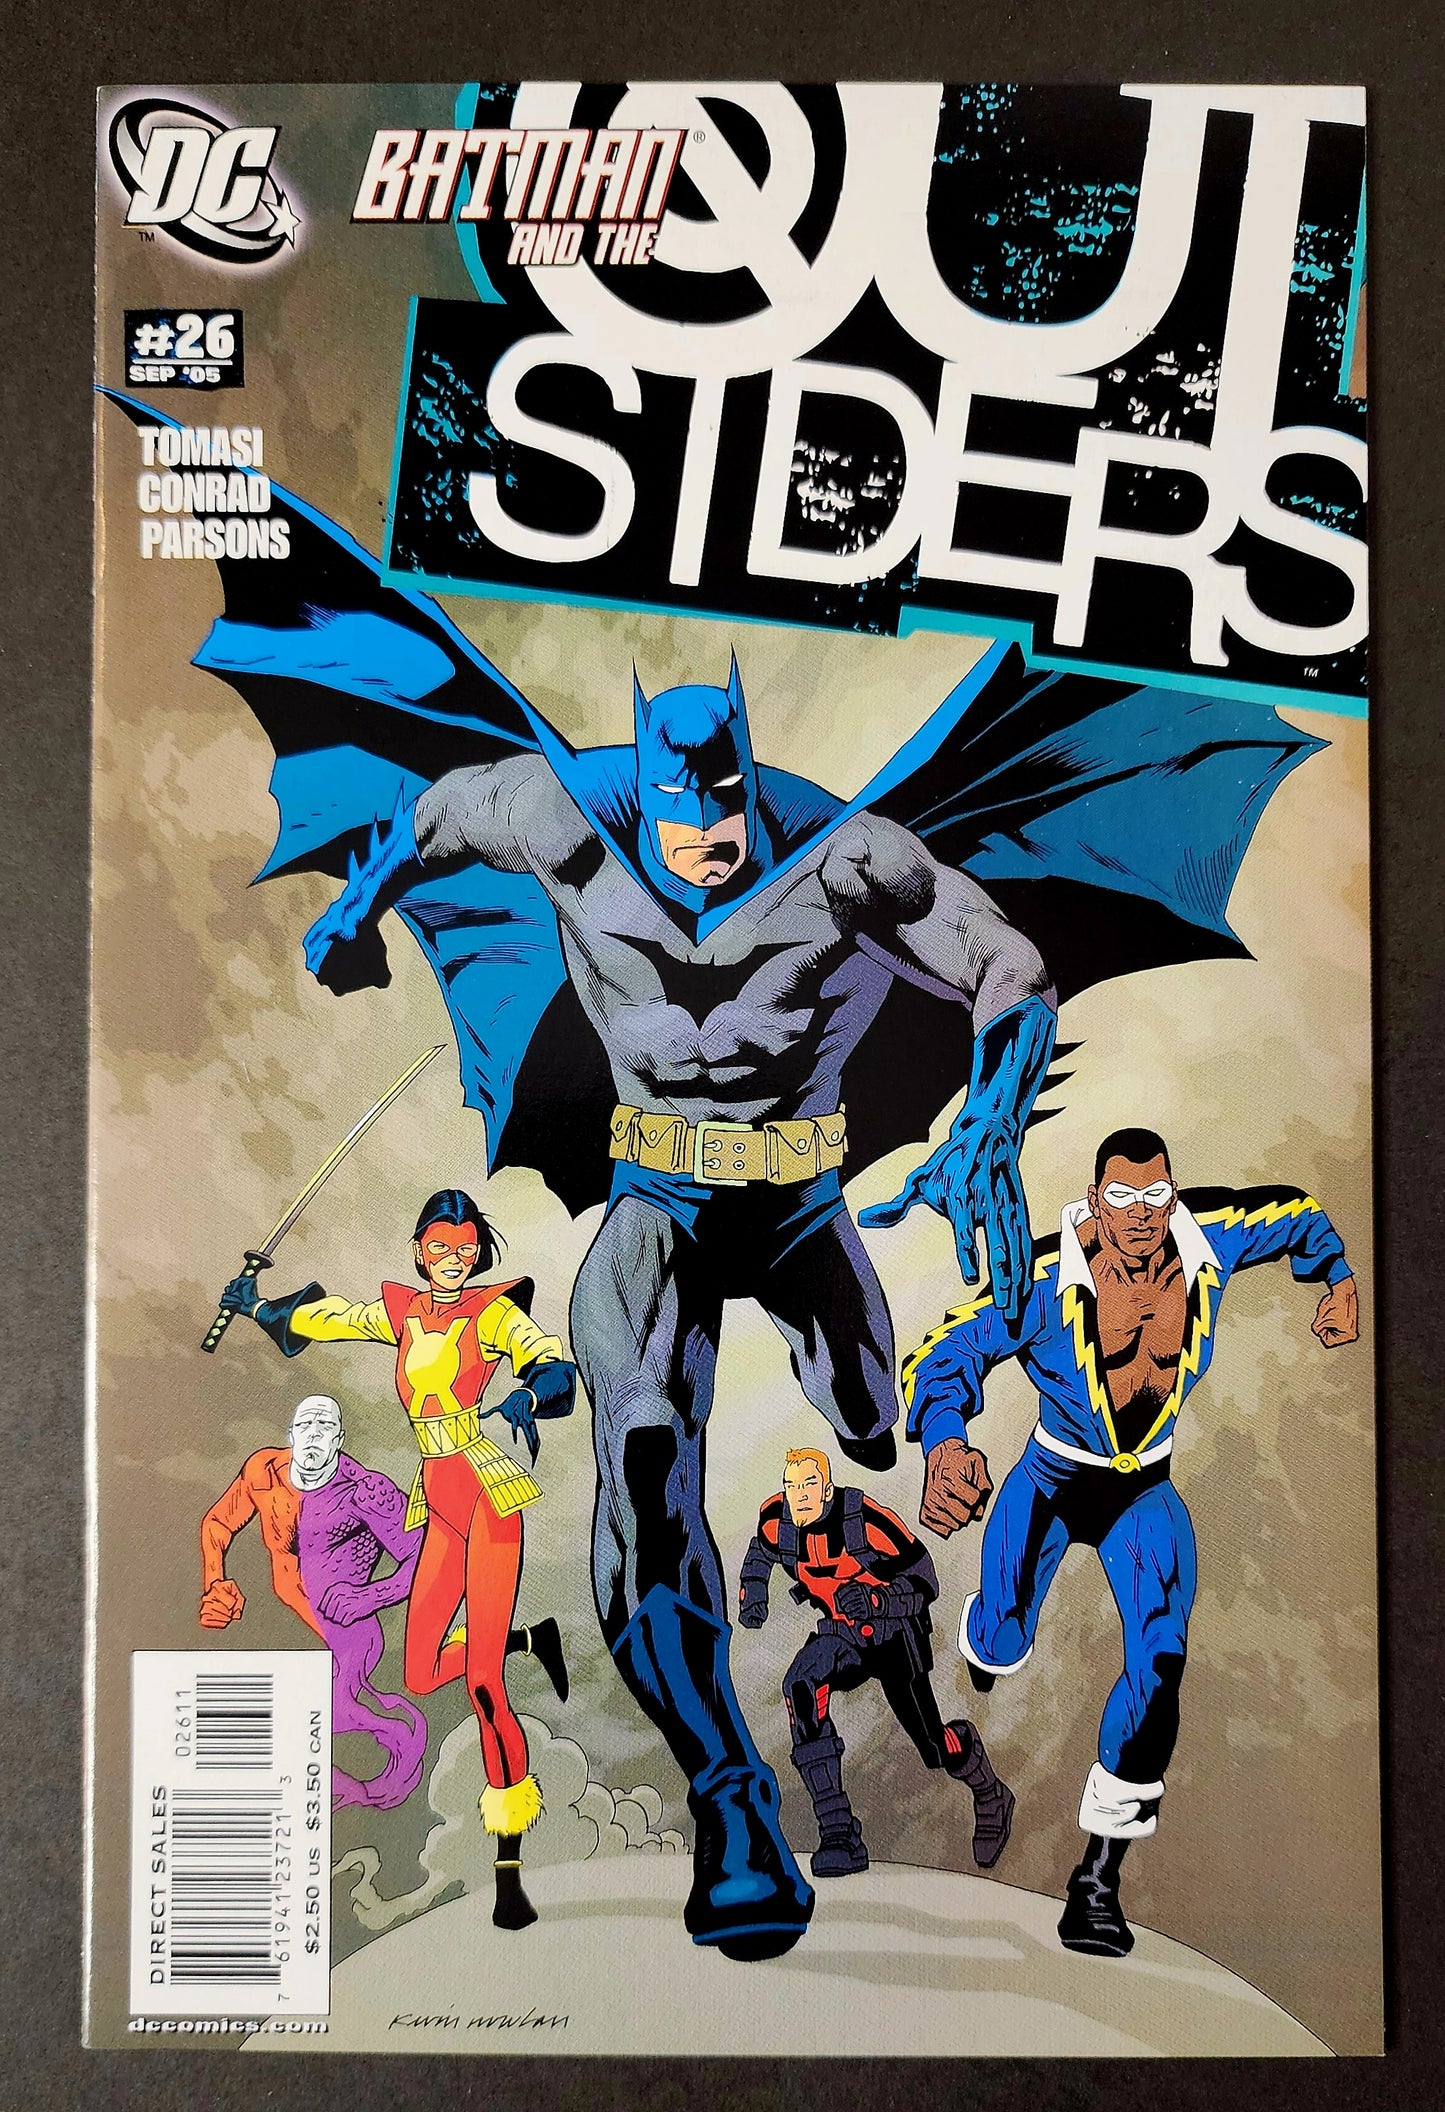 The Outsiders (Vol. 3) #26 (VF+)